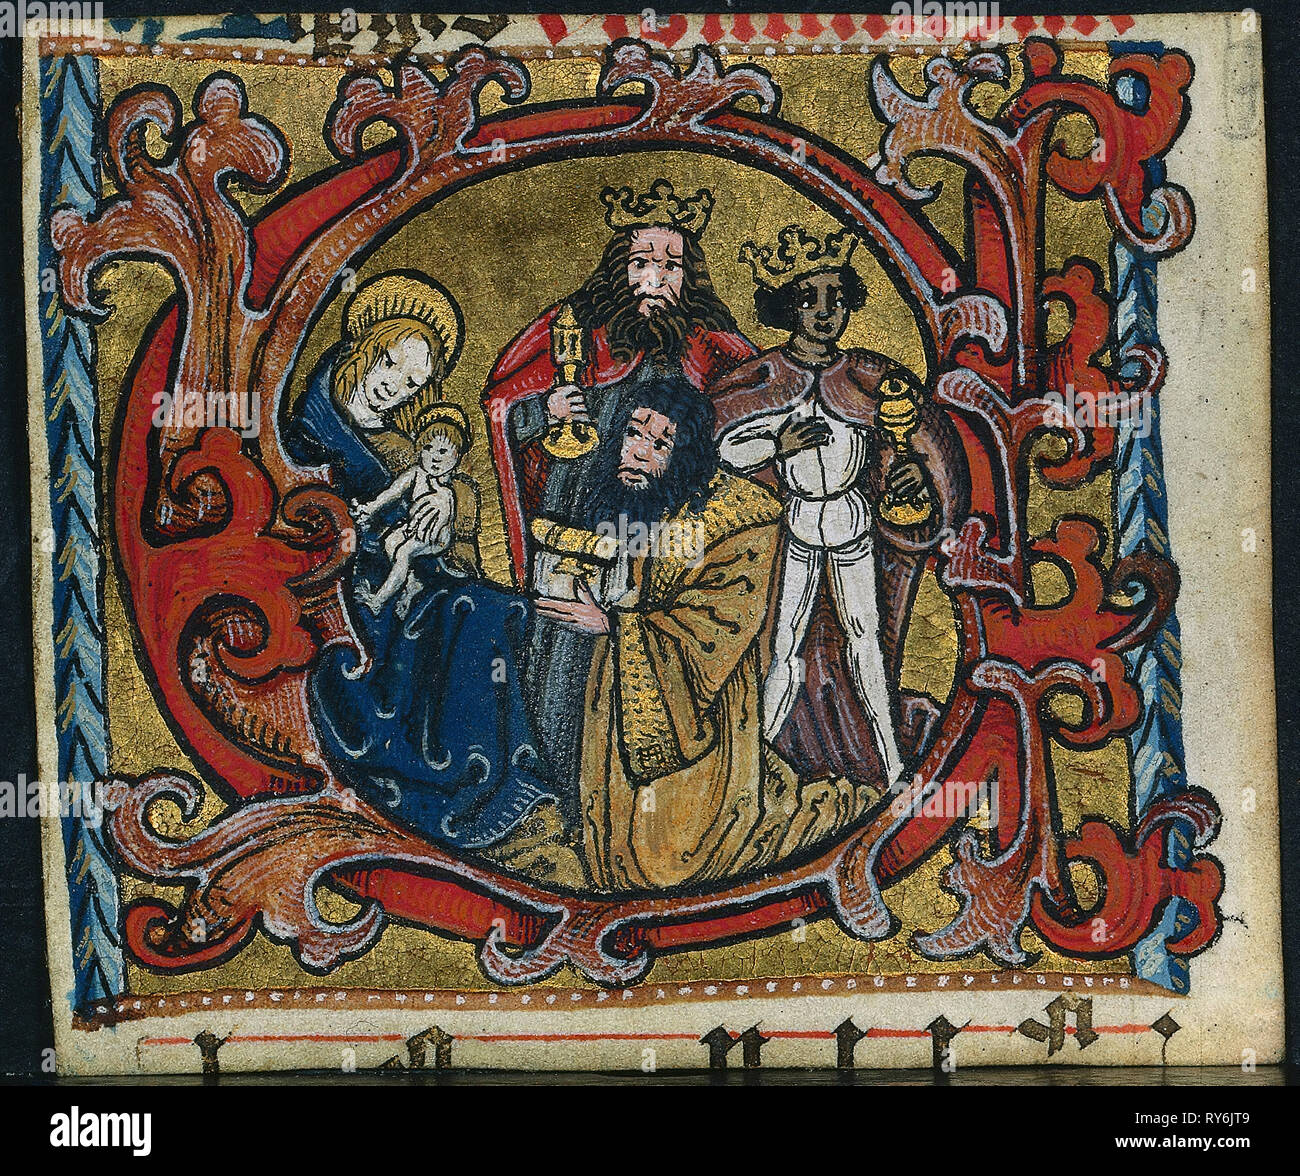 Three Cuttings from a Missal: Initial C with the Adoration of the Magi, c. 1470-1500. Germany, Franconia or Saxony (?) or Silesia (?), 15th century. Ink, tempera and gold on vellum; each leaf: 9.4 x 8 cm (3 11/16 x 3 1/8 in Stock Photo